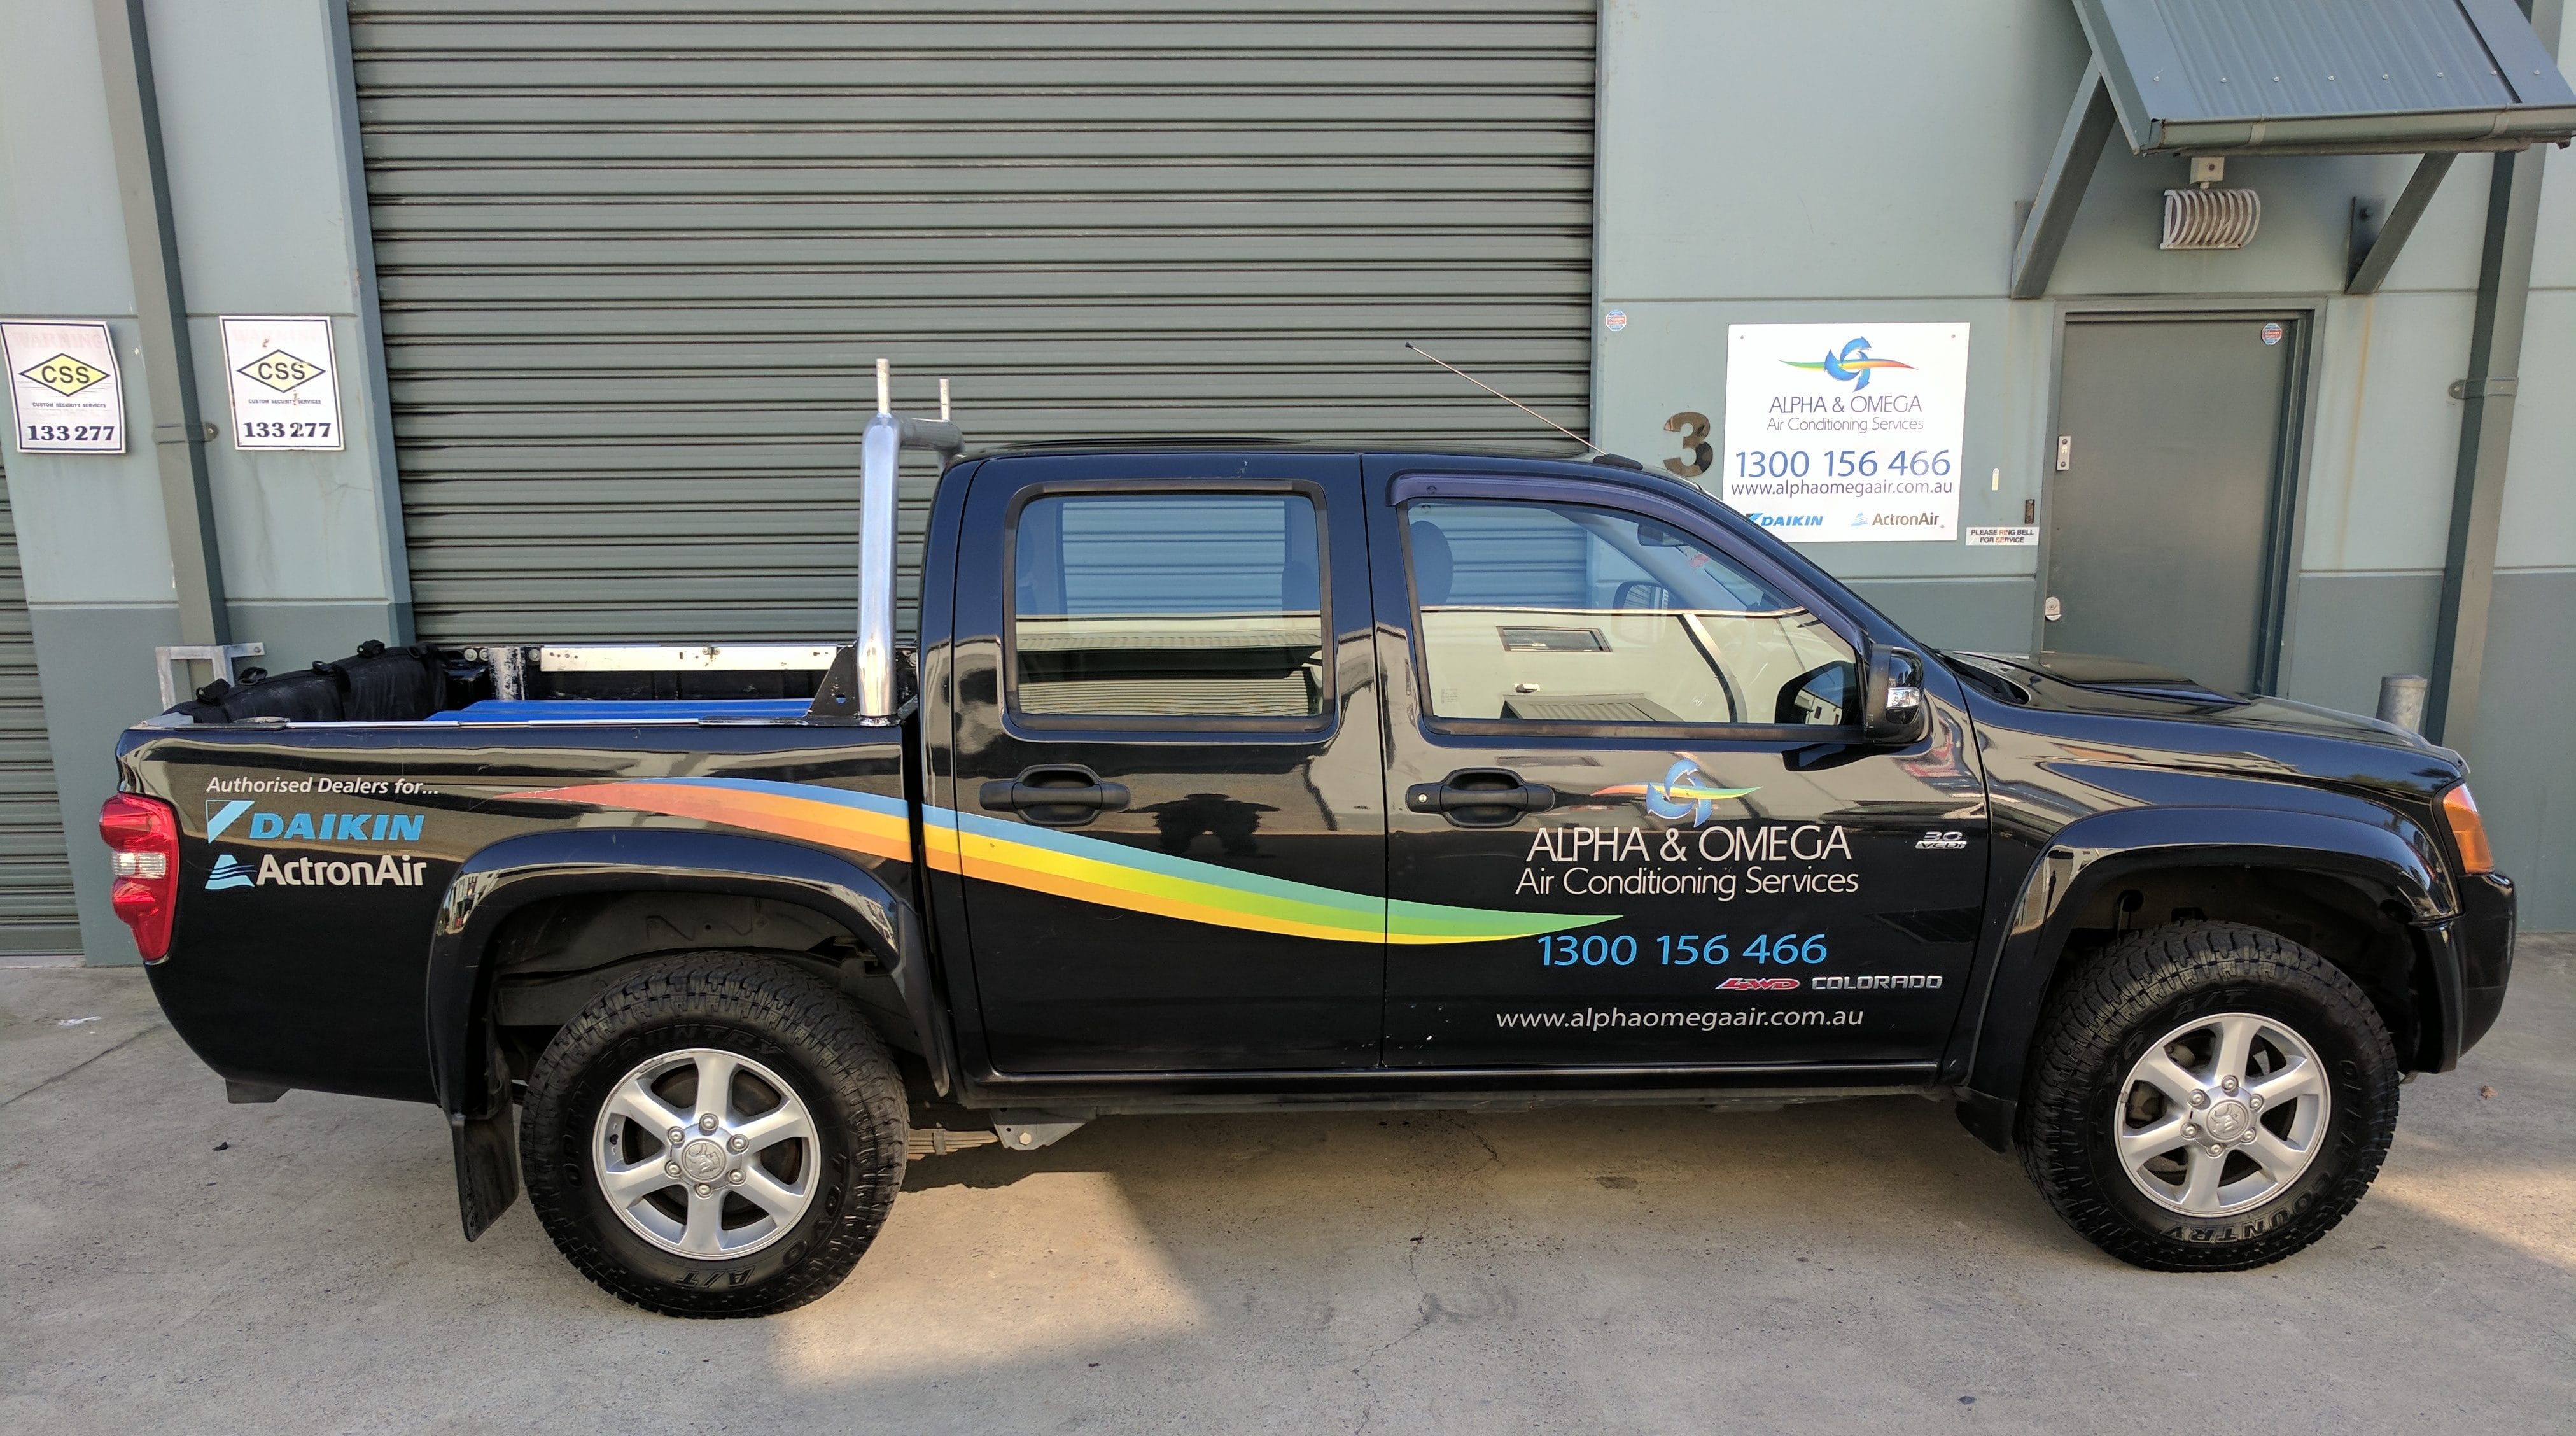 Air Conditioning Services in Wollongong